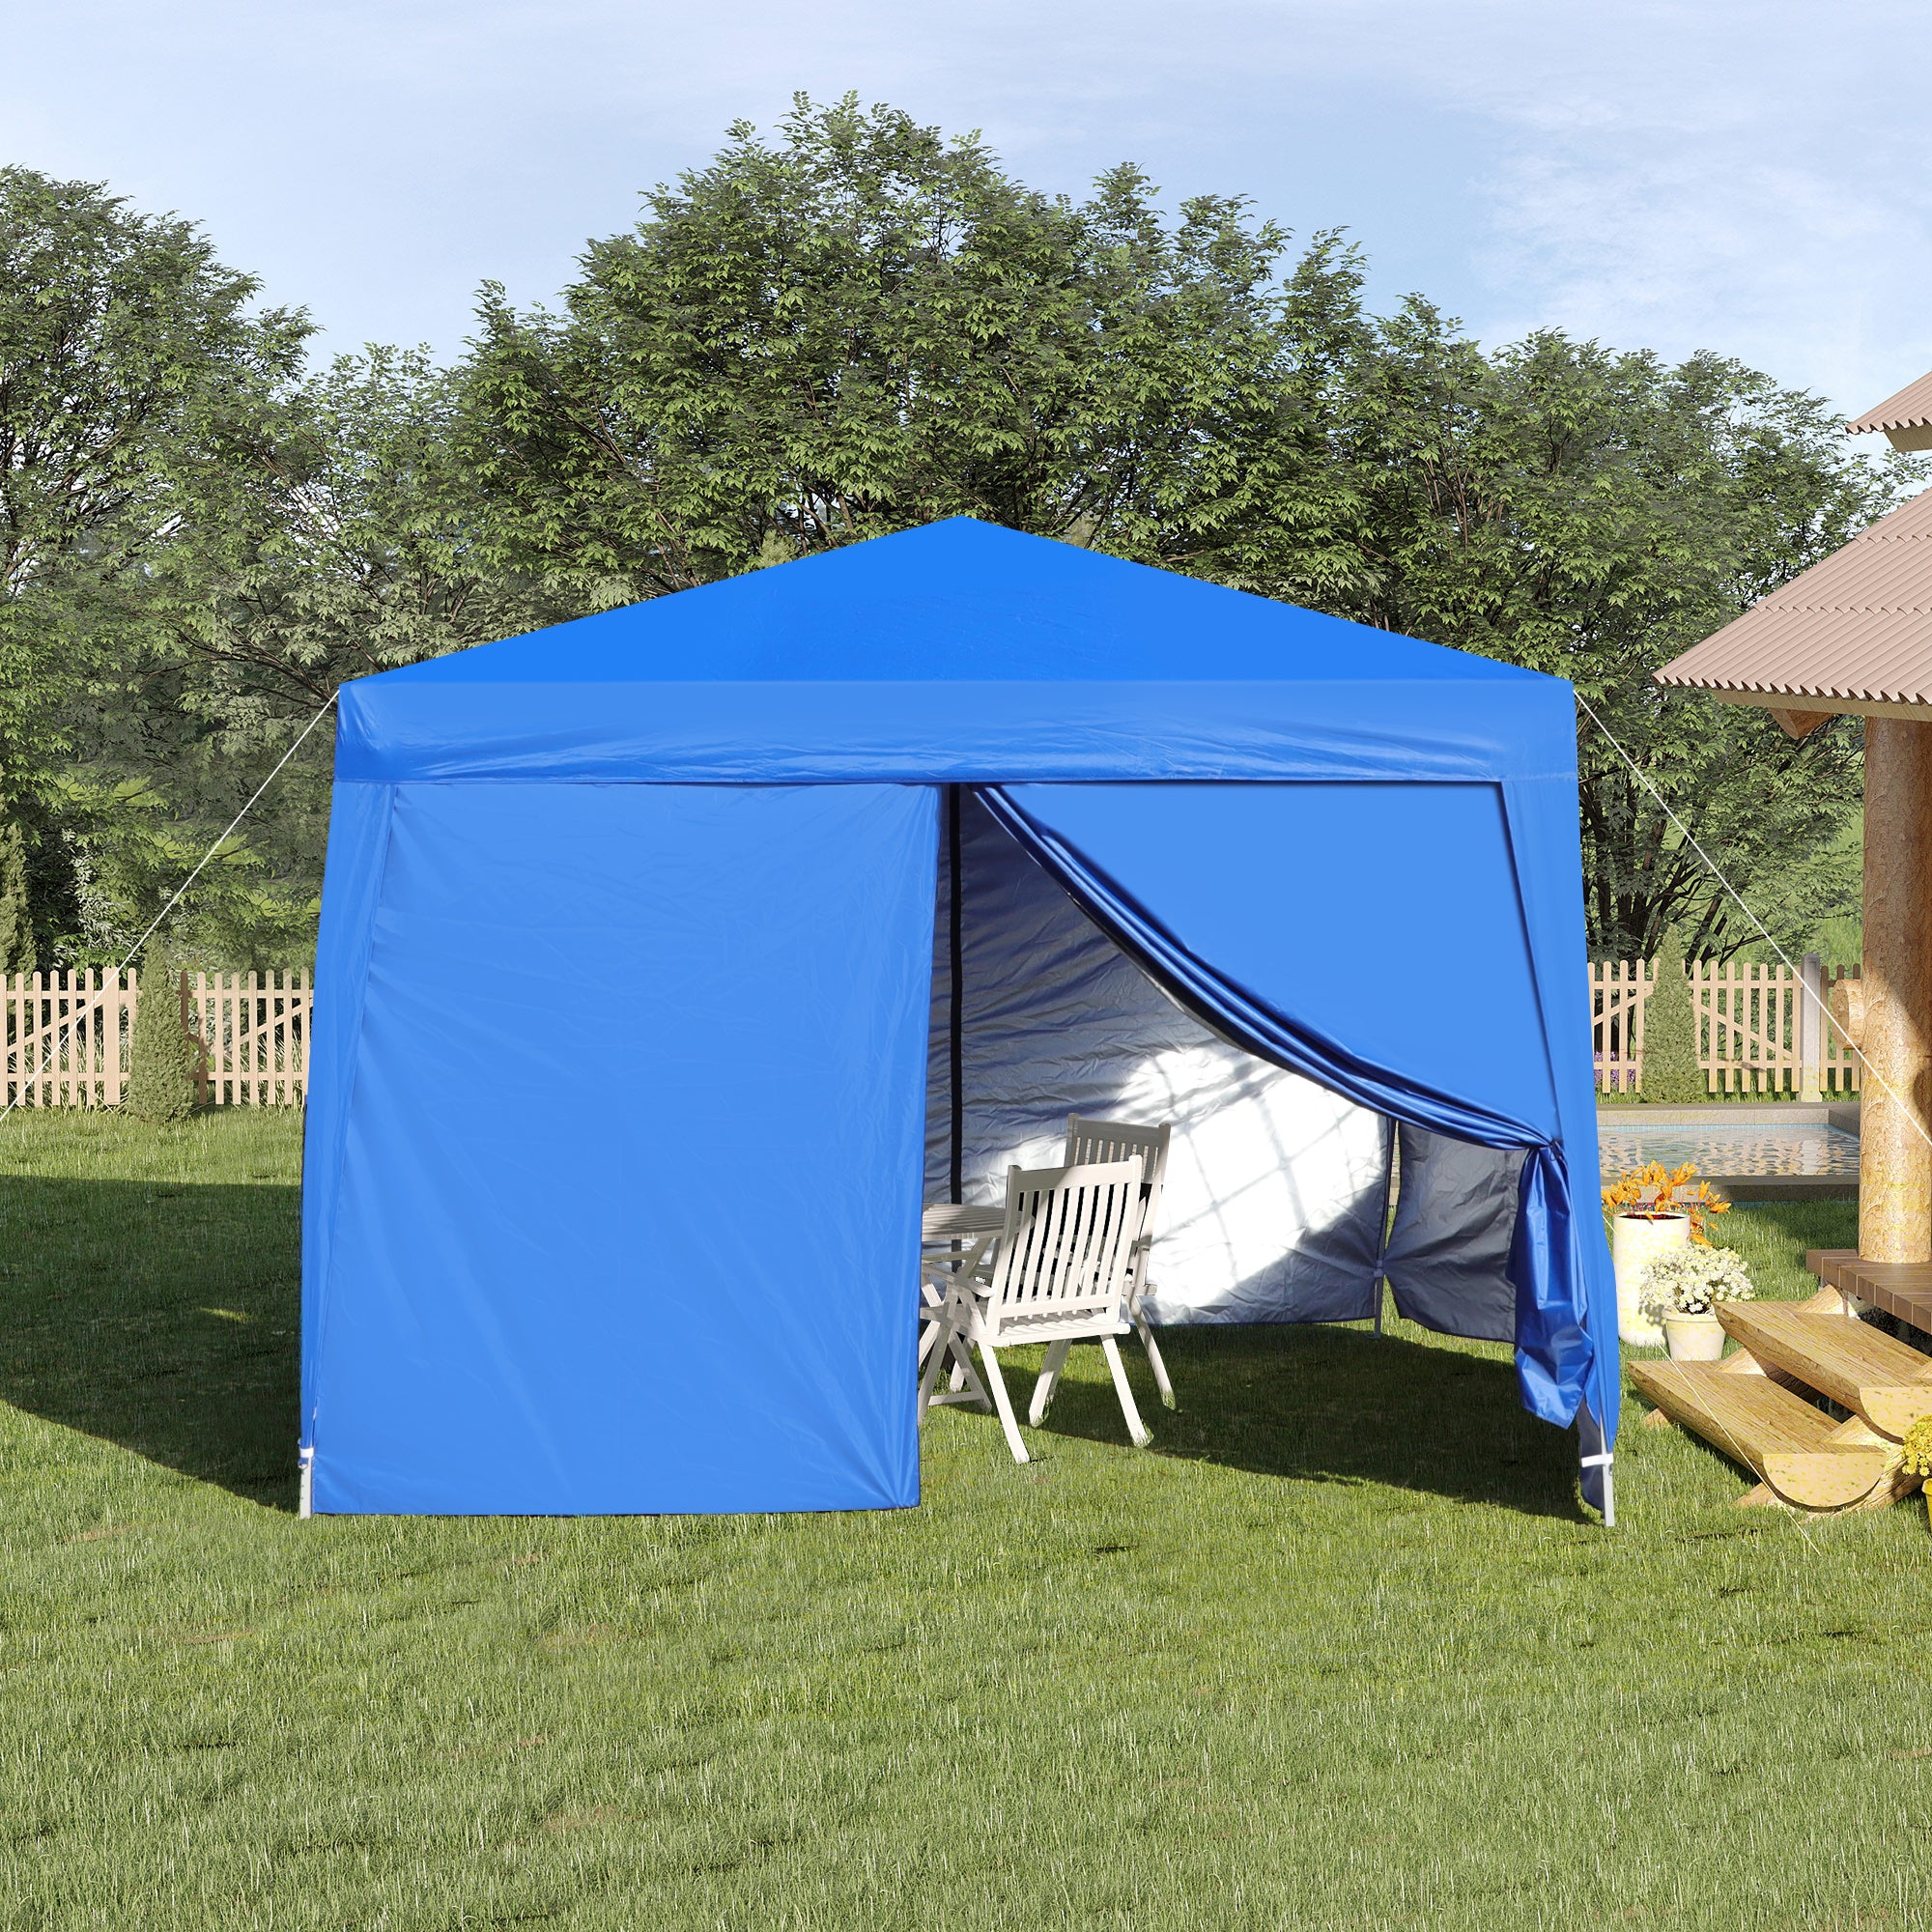 🆓🚛 Outdoor 10x 10Ft Pop Up Gazebo Canopy Tent, Removable Sidewall with Zipper, 2pcs Sidewall with Windows, with 4pcs Weight Sand Bags & Carry Bag, Blue